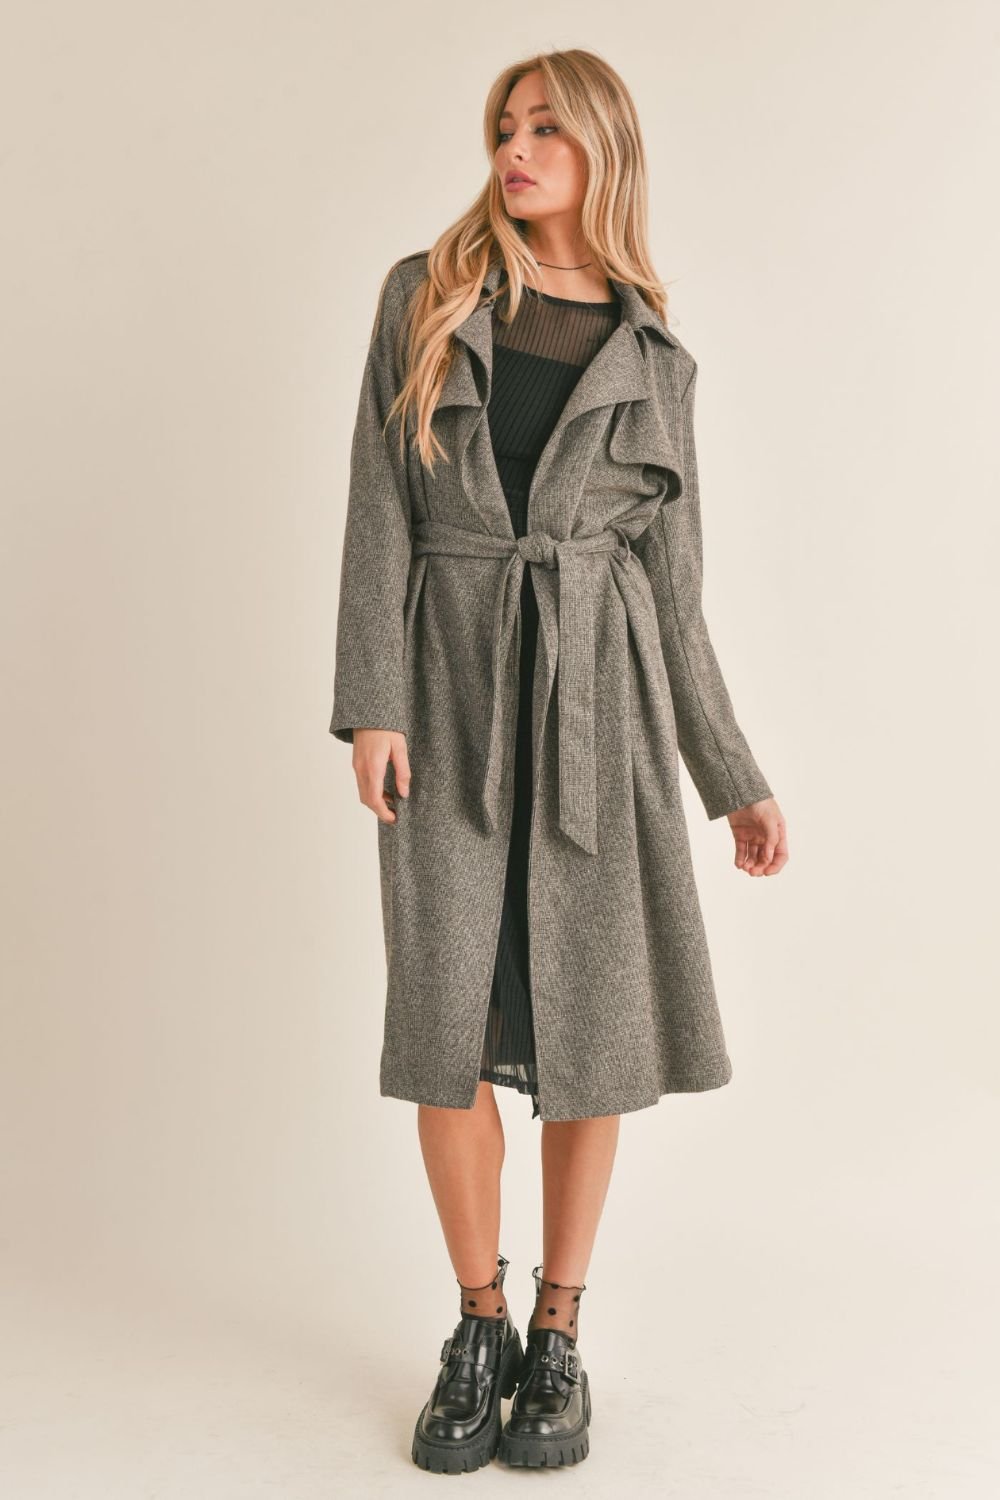 Women's Trench Coat | Long Jacket | Mini Plaid | Brown Multi - Women's Jacket - Blooming Daily